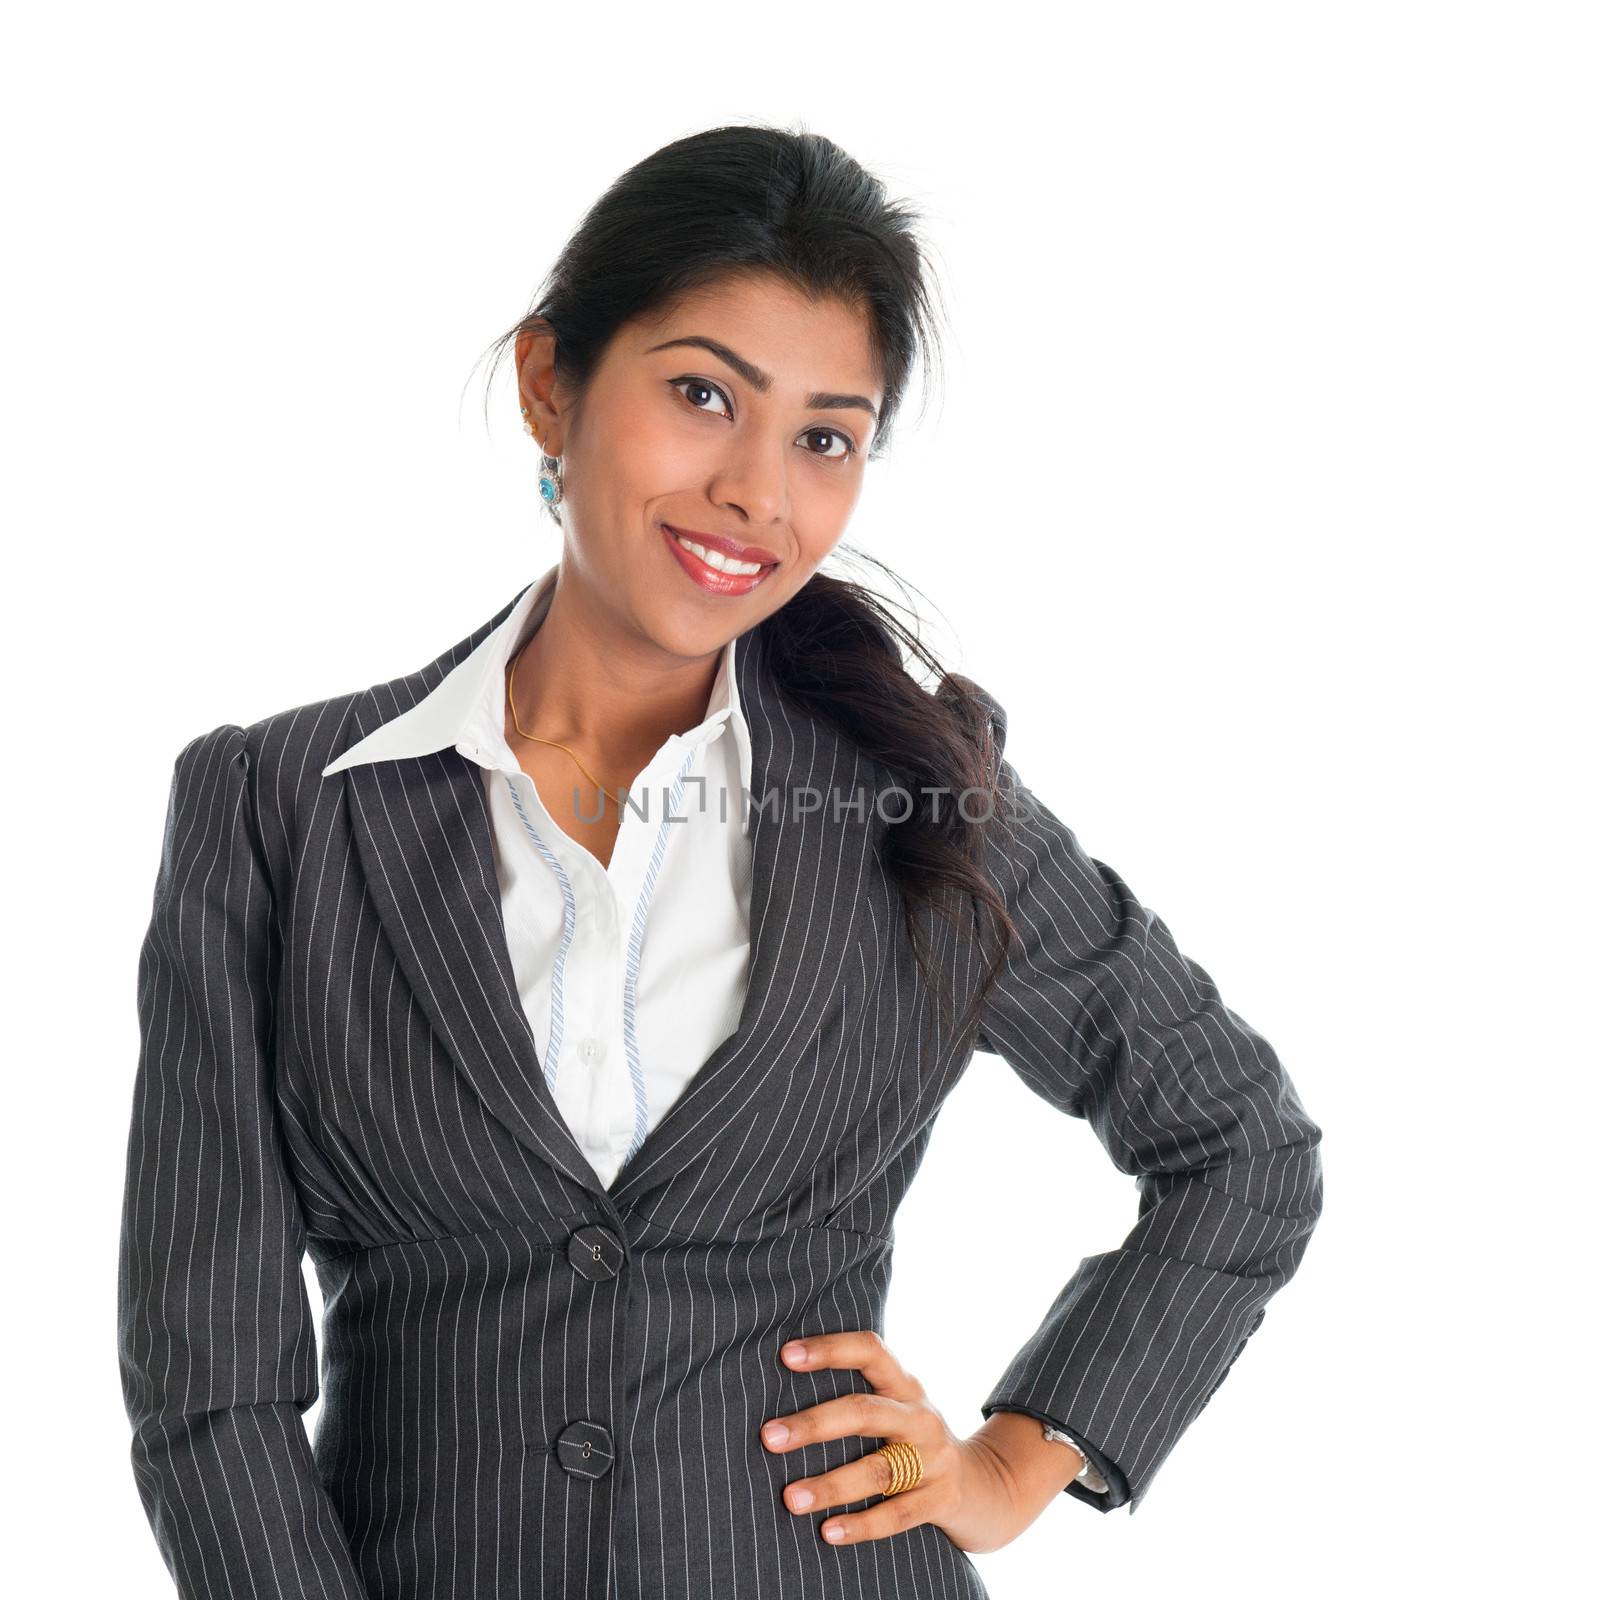 Portrait of attractive African American businesswoman in business suit, isolated over white background. Mixed race Asian Indian and African American model.